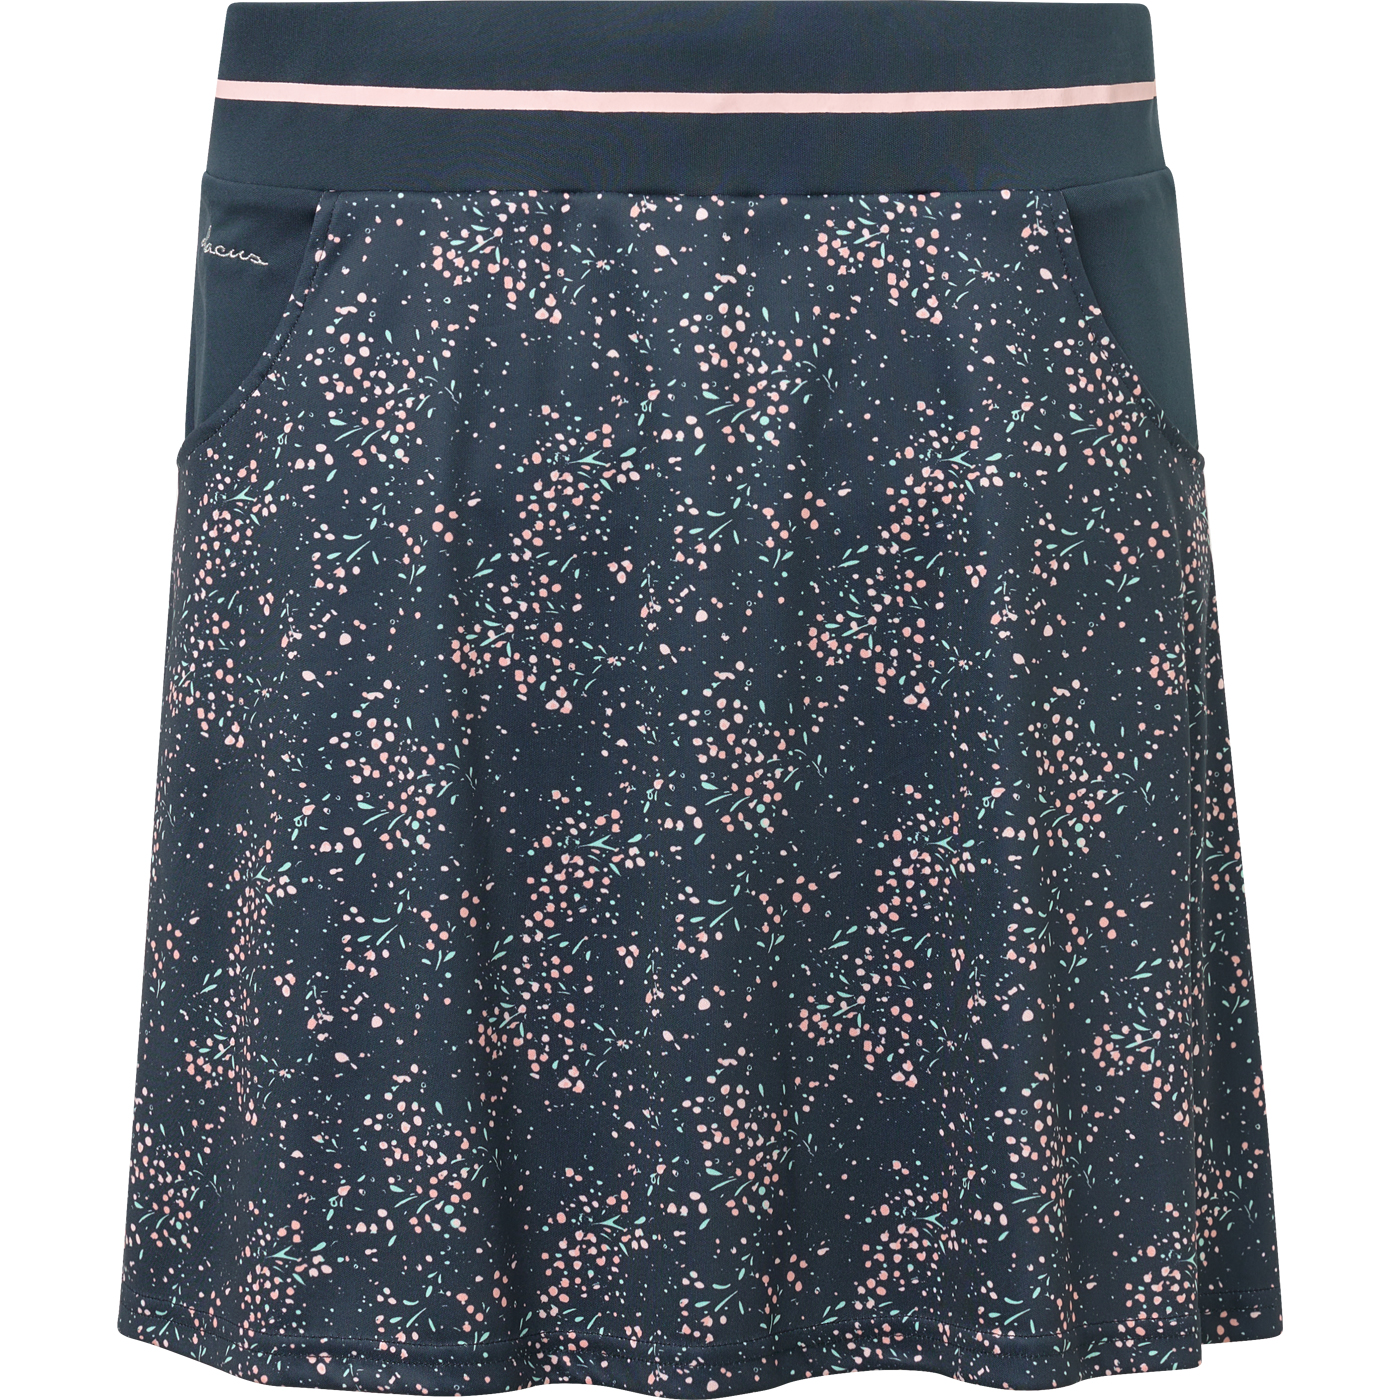 Lds Juliet skort 45cm - navy floral in the group WOMEN / All clothing at Abacus Sportswear (2972737)